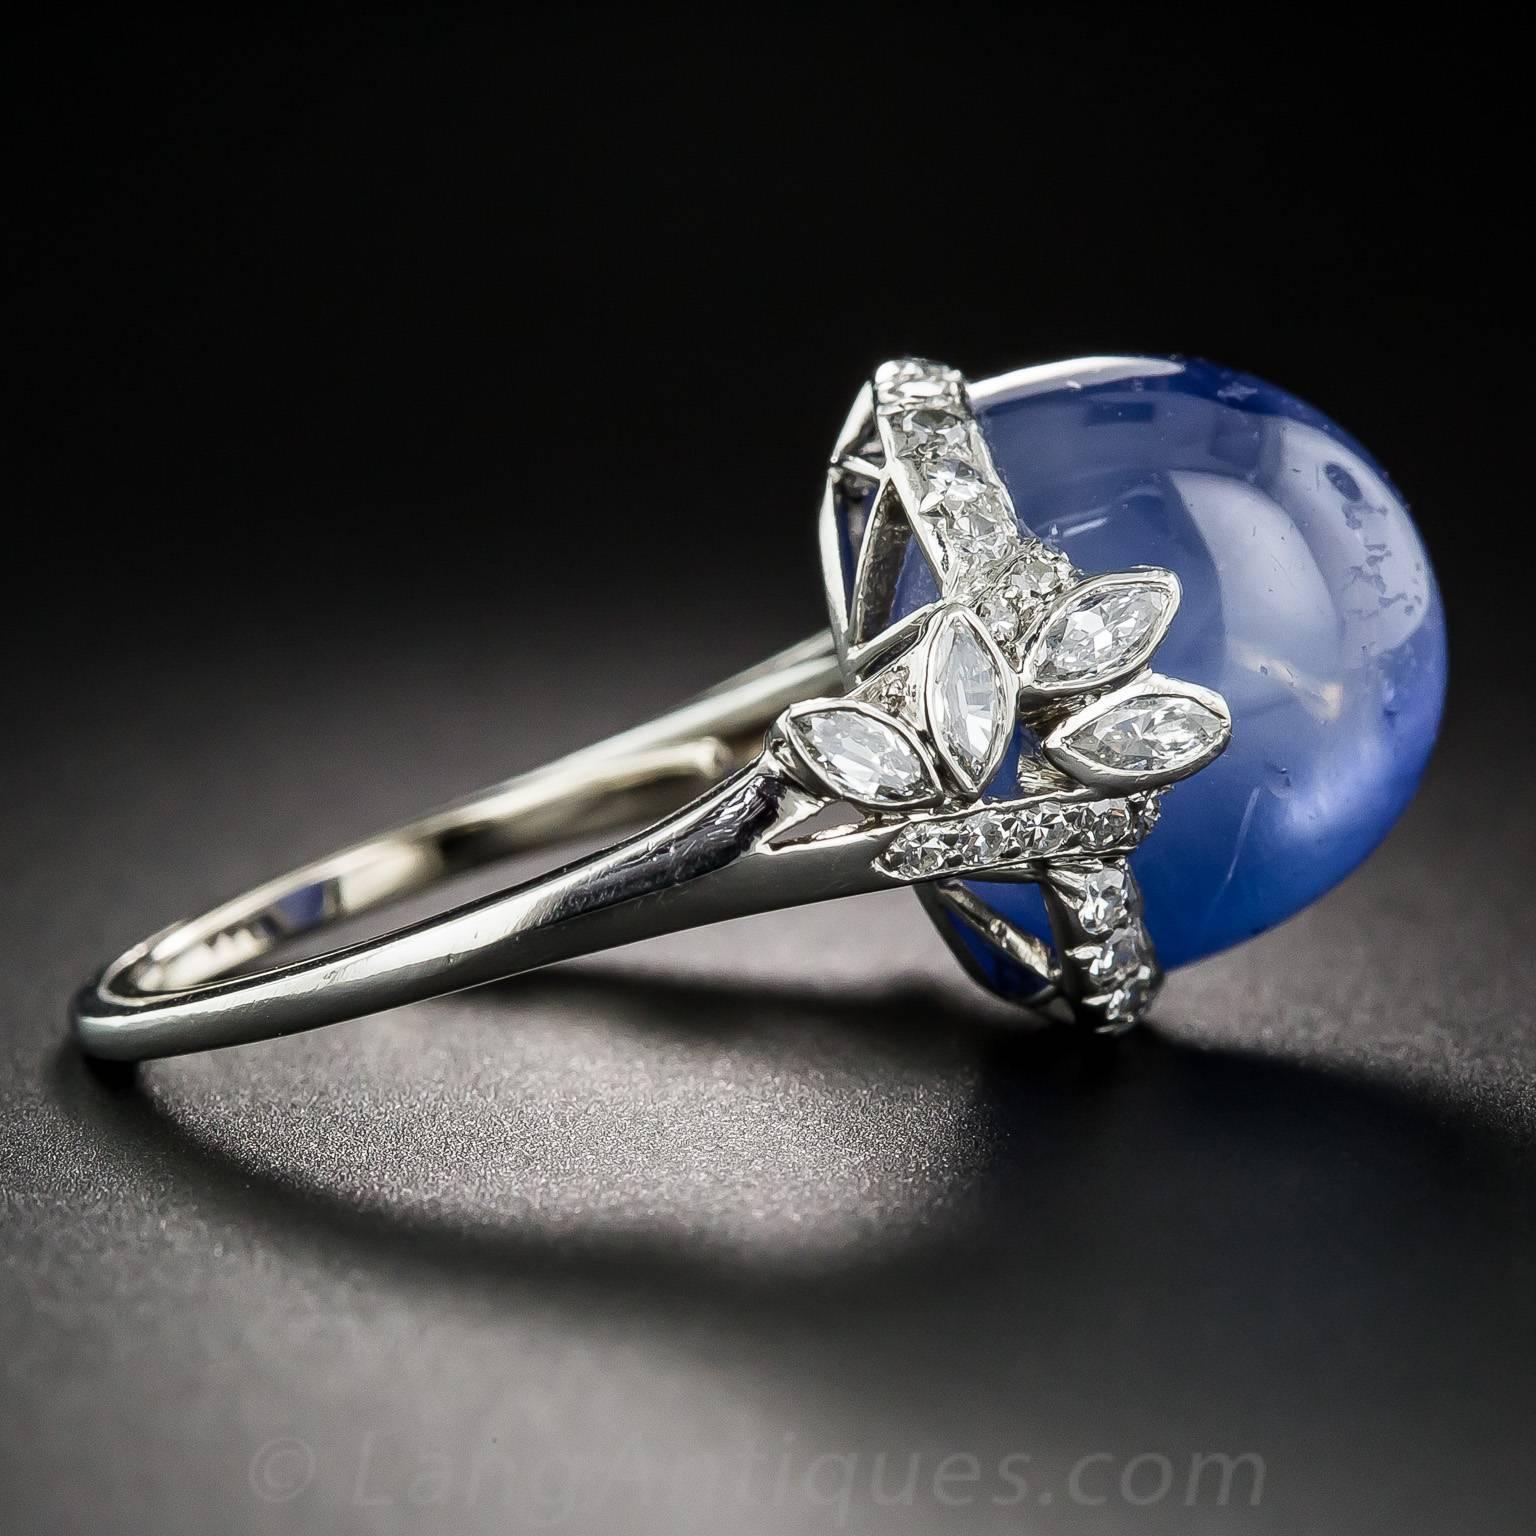 19 Carat No-Heat Burma Star Sapphire and Diamond Late Art Deco Ring In Excellent Condition For Sale In San Francisco, CA